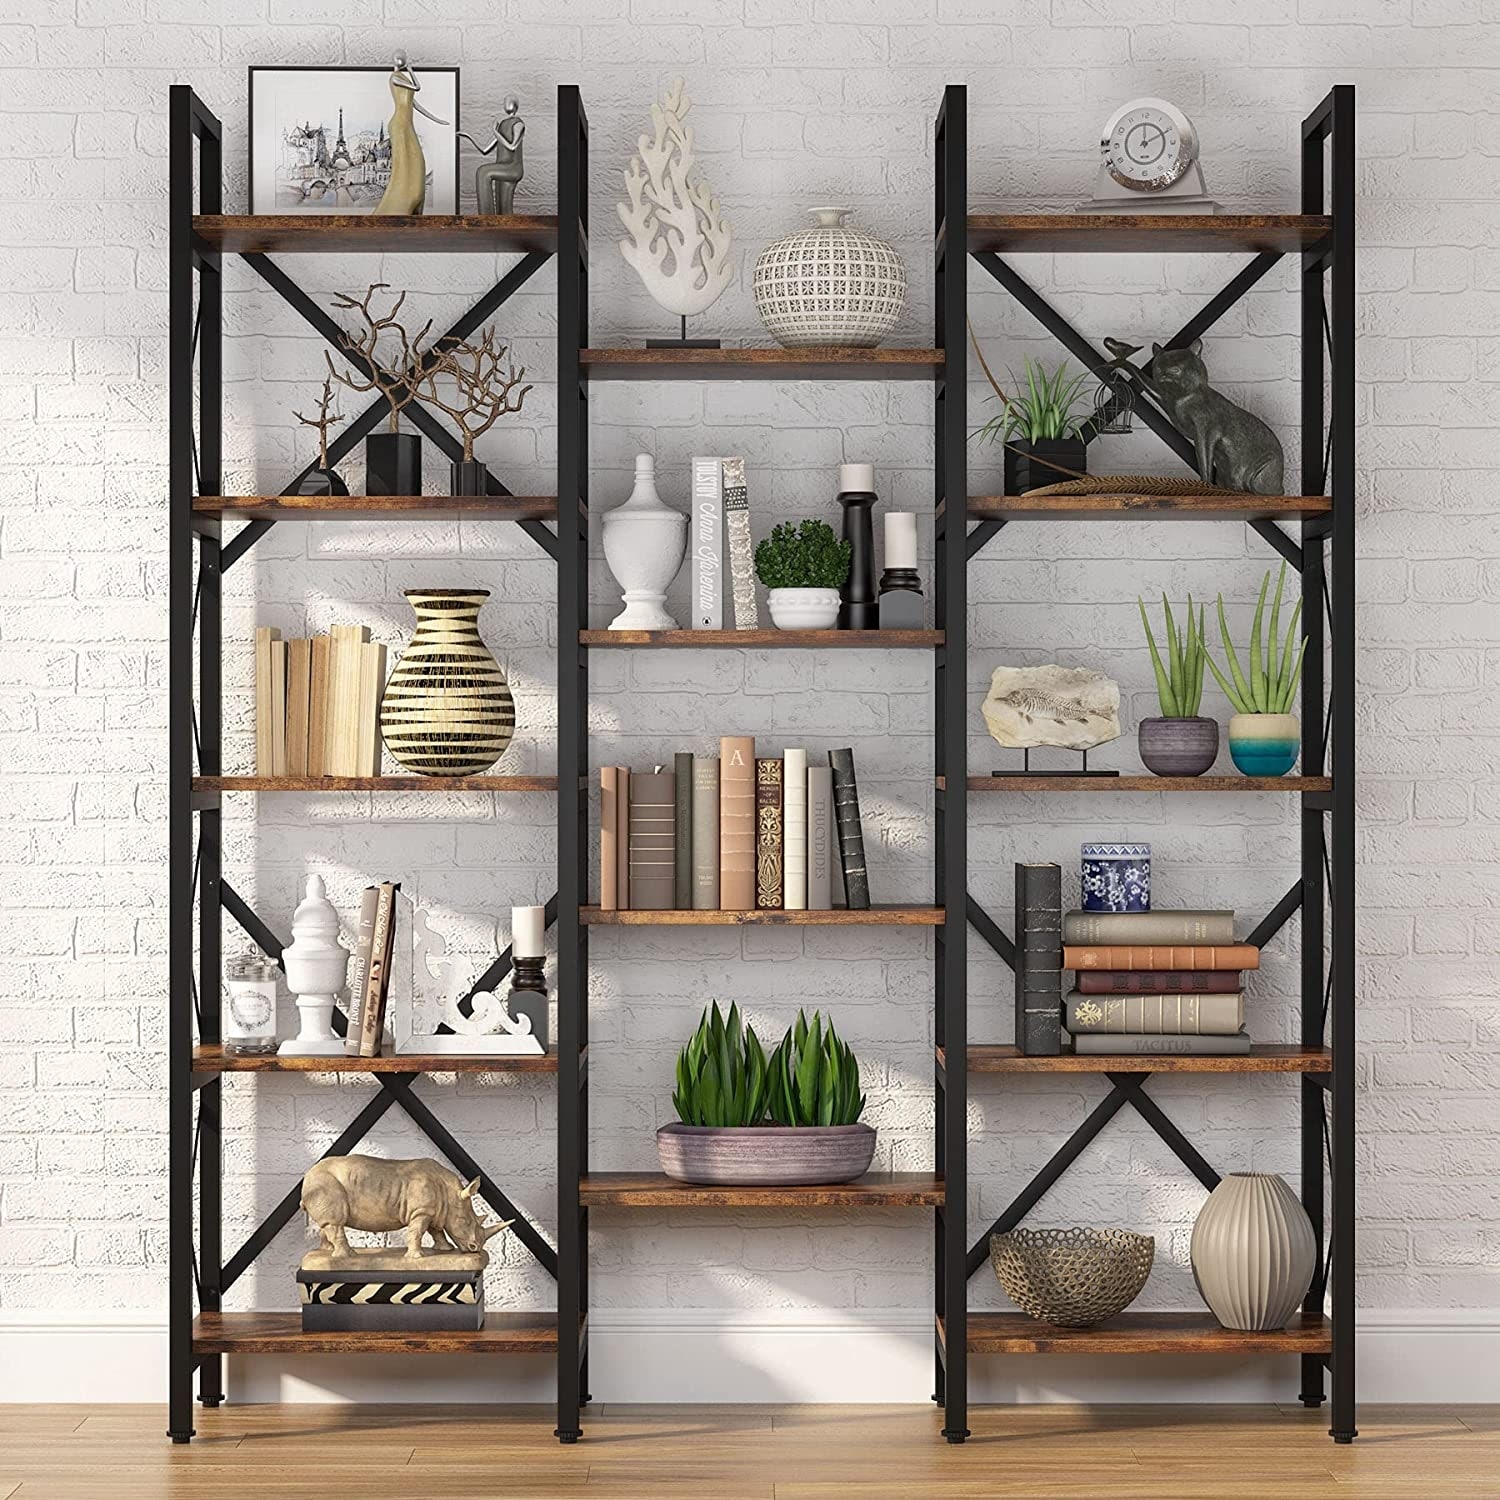 https://ak1.ostkcdn.com/images/products/is/images/direct/bb9be8905368c2ee1cace7aacdae62db347d2068/Large-Triple-Wide-5-Shelf-Etagere-Bookcase.jpg